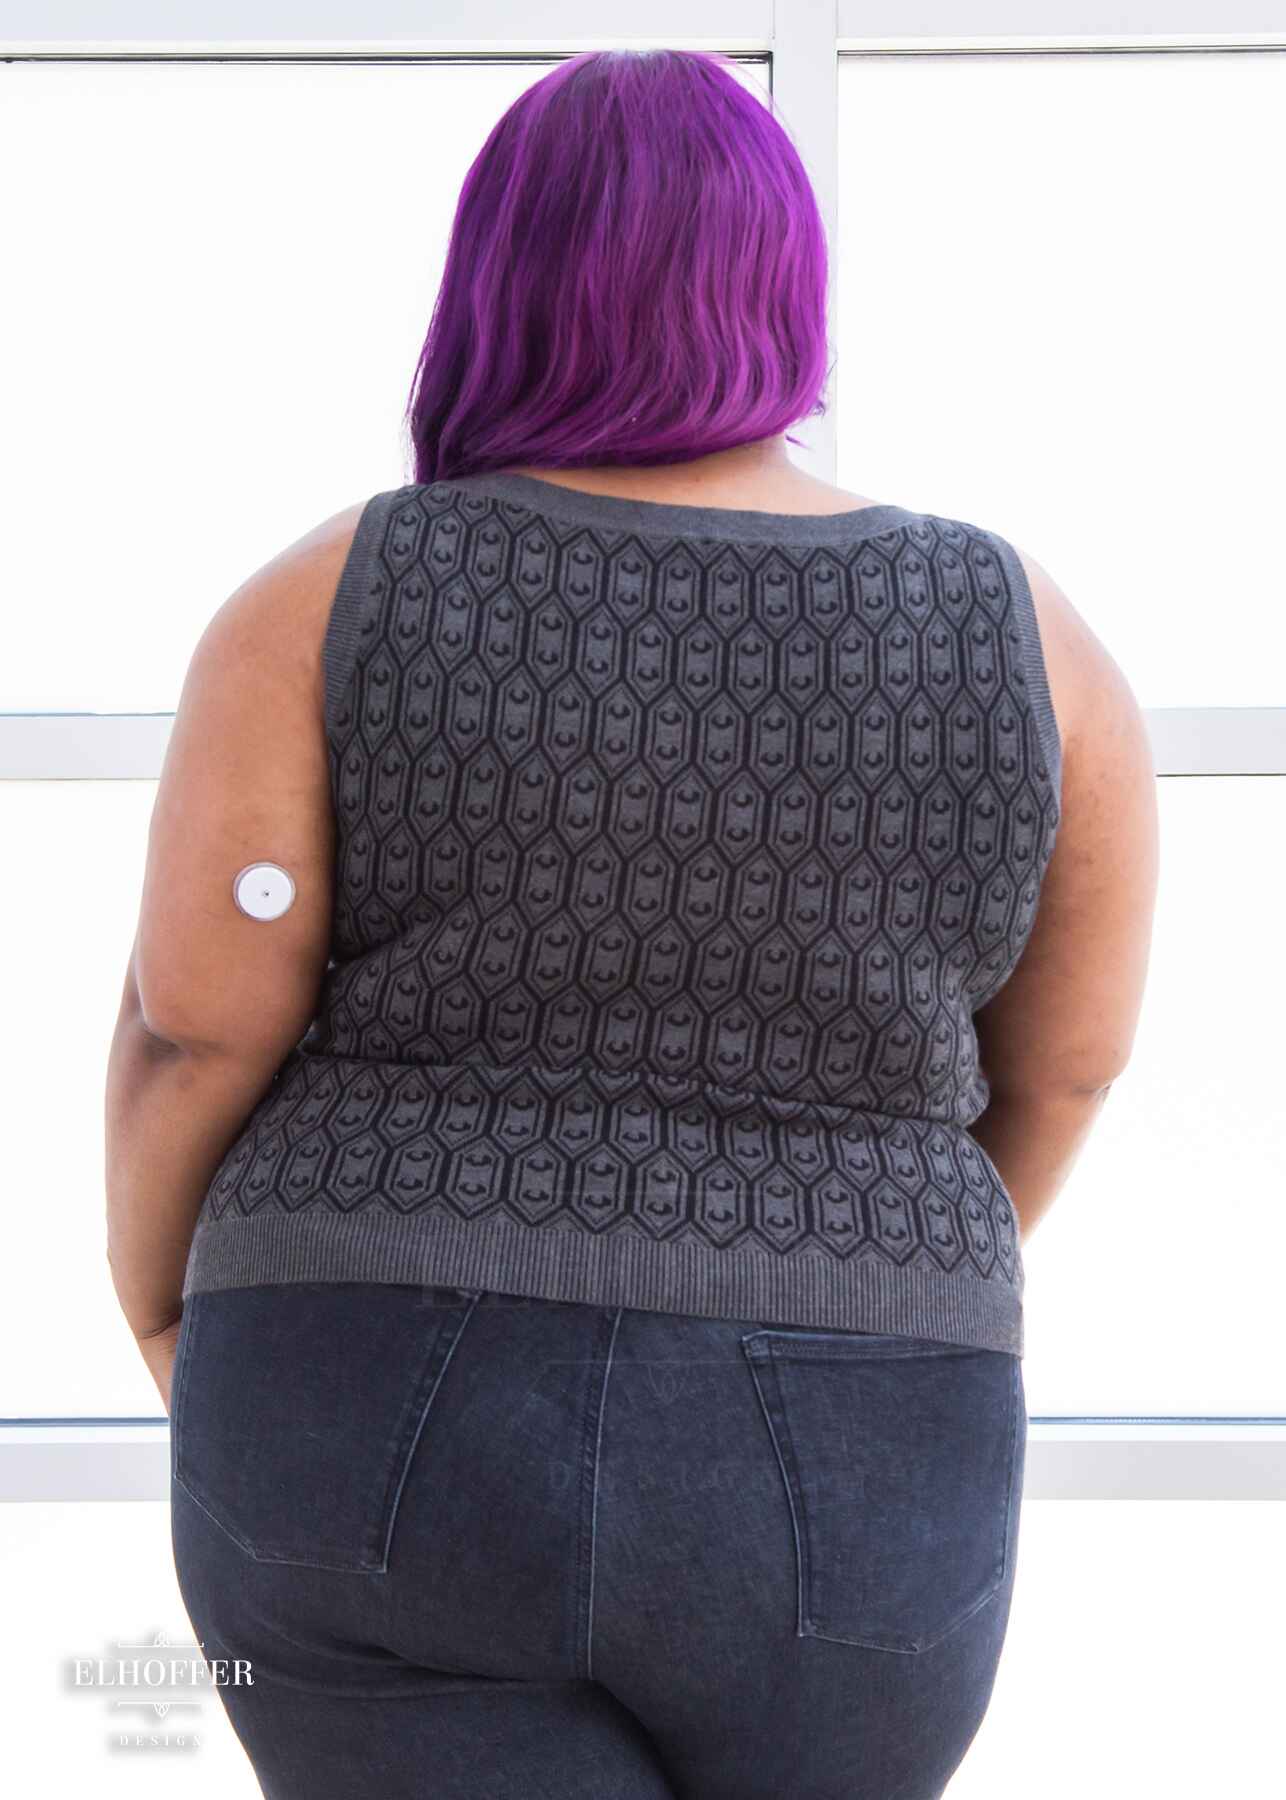 Jade is modeling the Production 2XL. She has a 52” Chest, 41.” Waist, 54” Hips and is 5’4”.